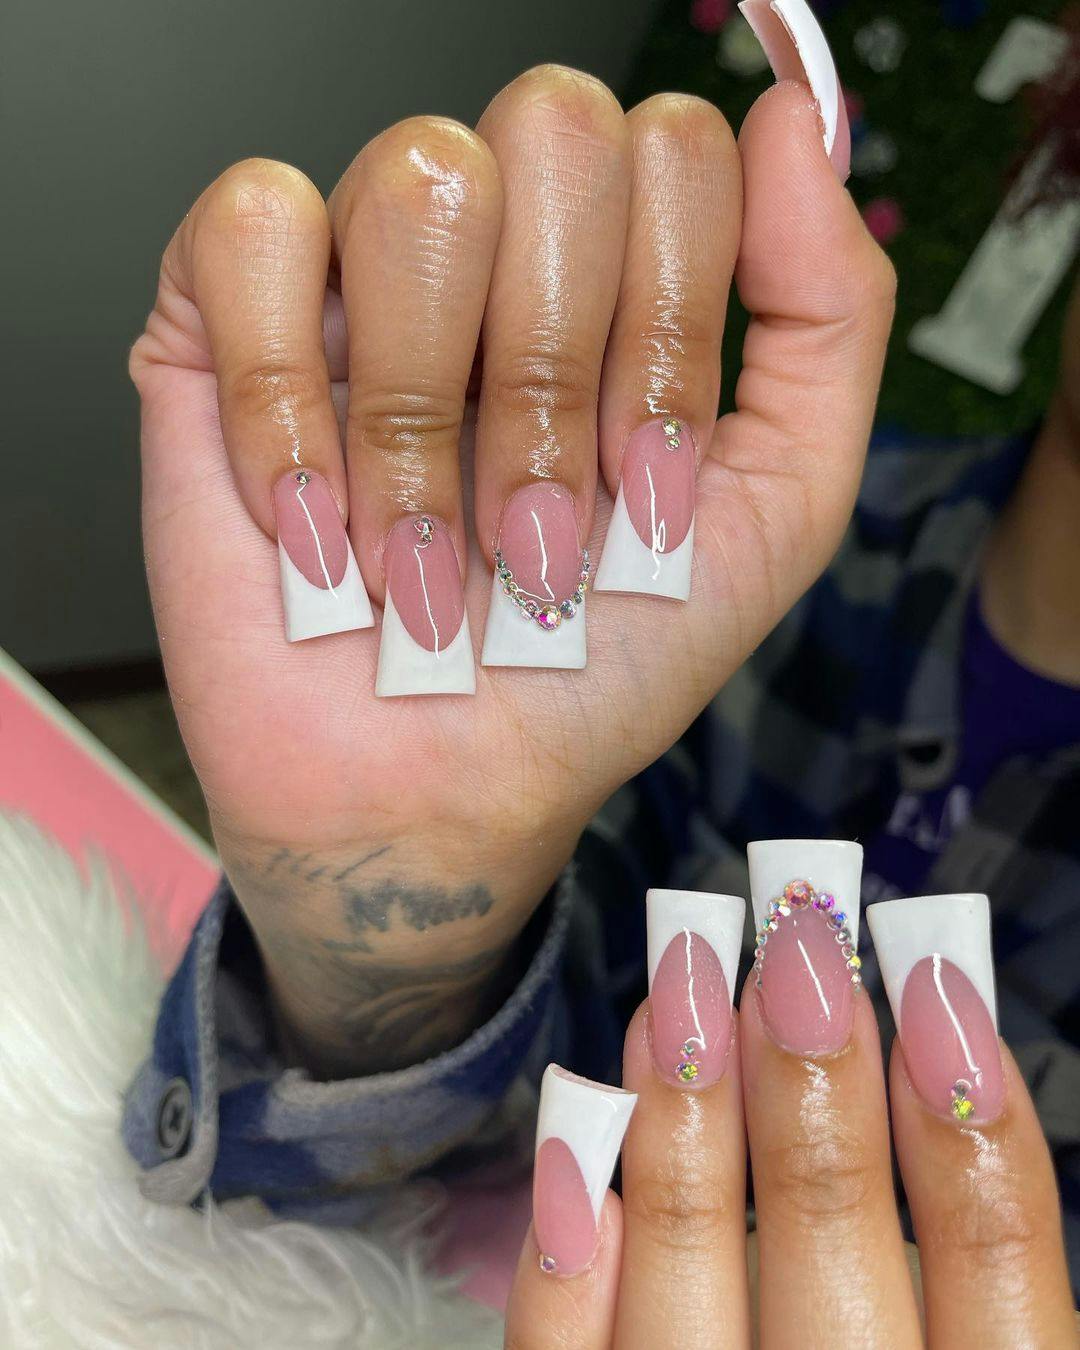 Nail inspo | Short nail designs you should try | TrueLove